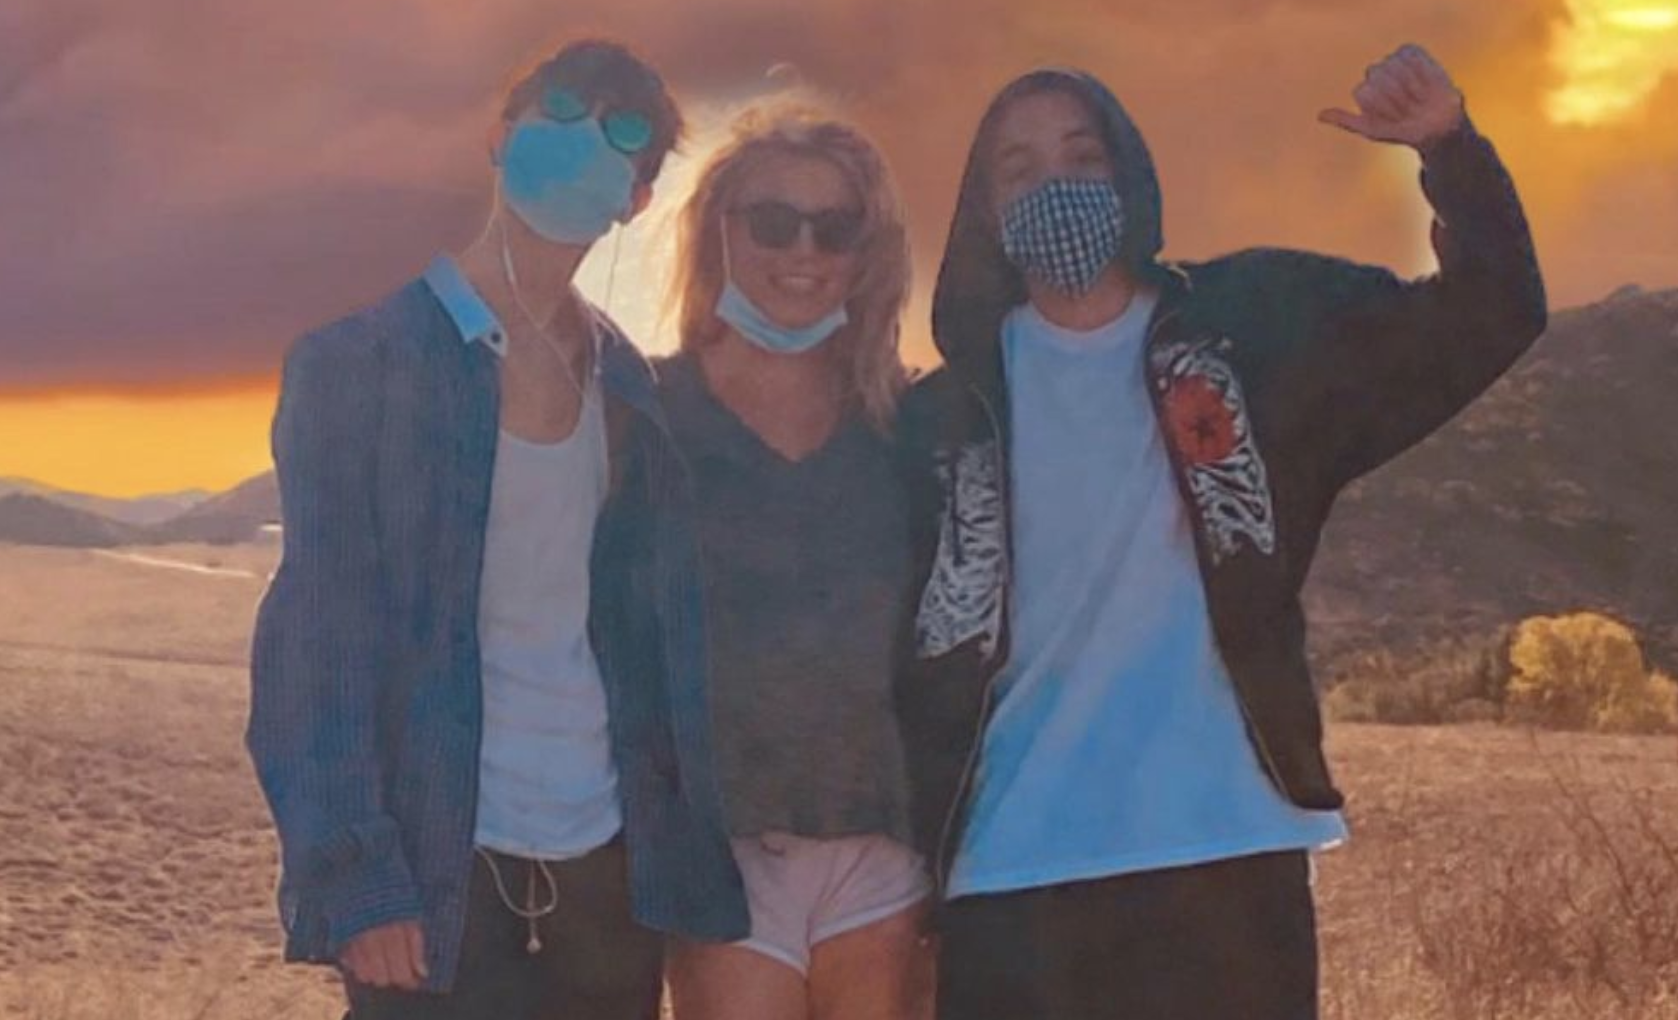 Britney Spears shares a rare photo of her sons Sean Preston, 15, and Jayden James, 14